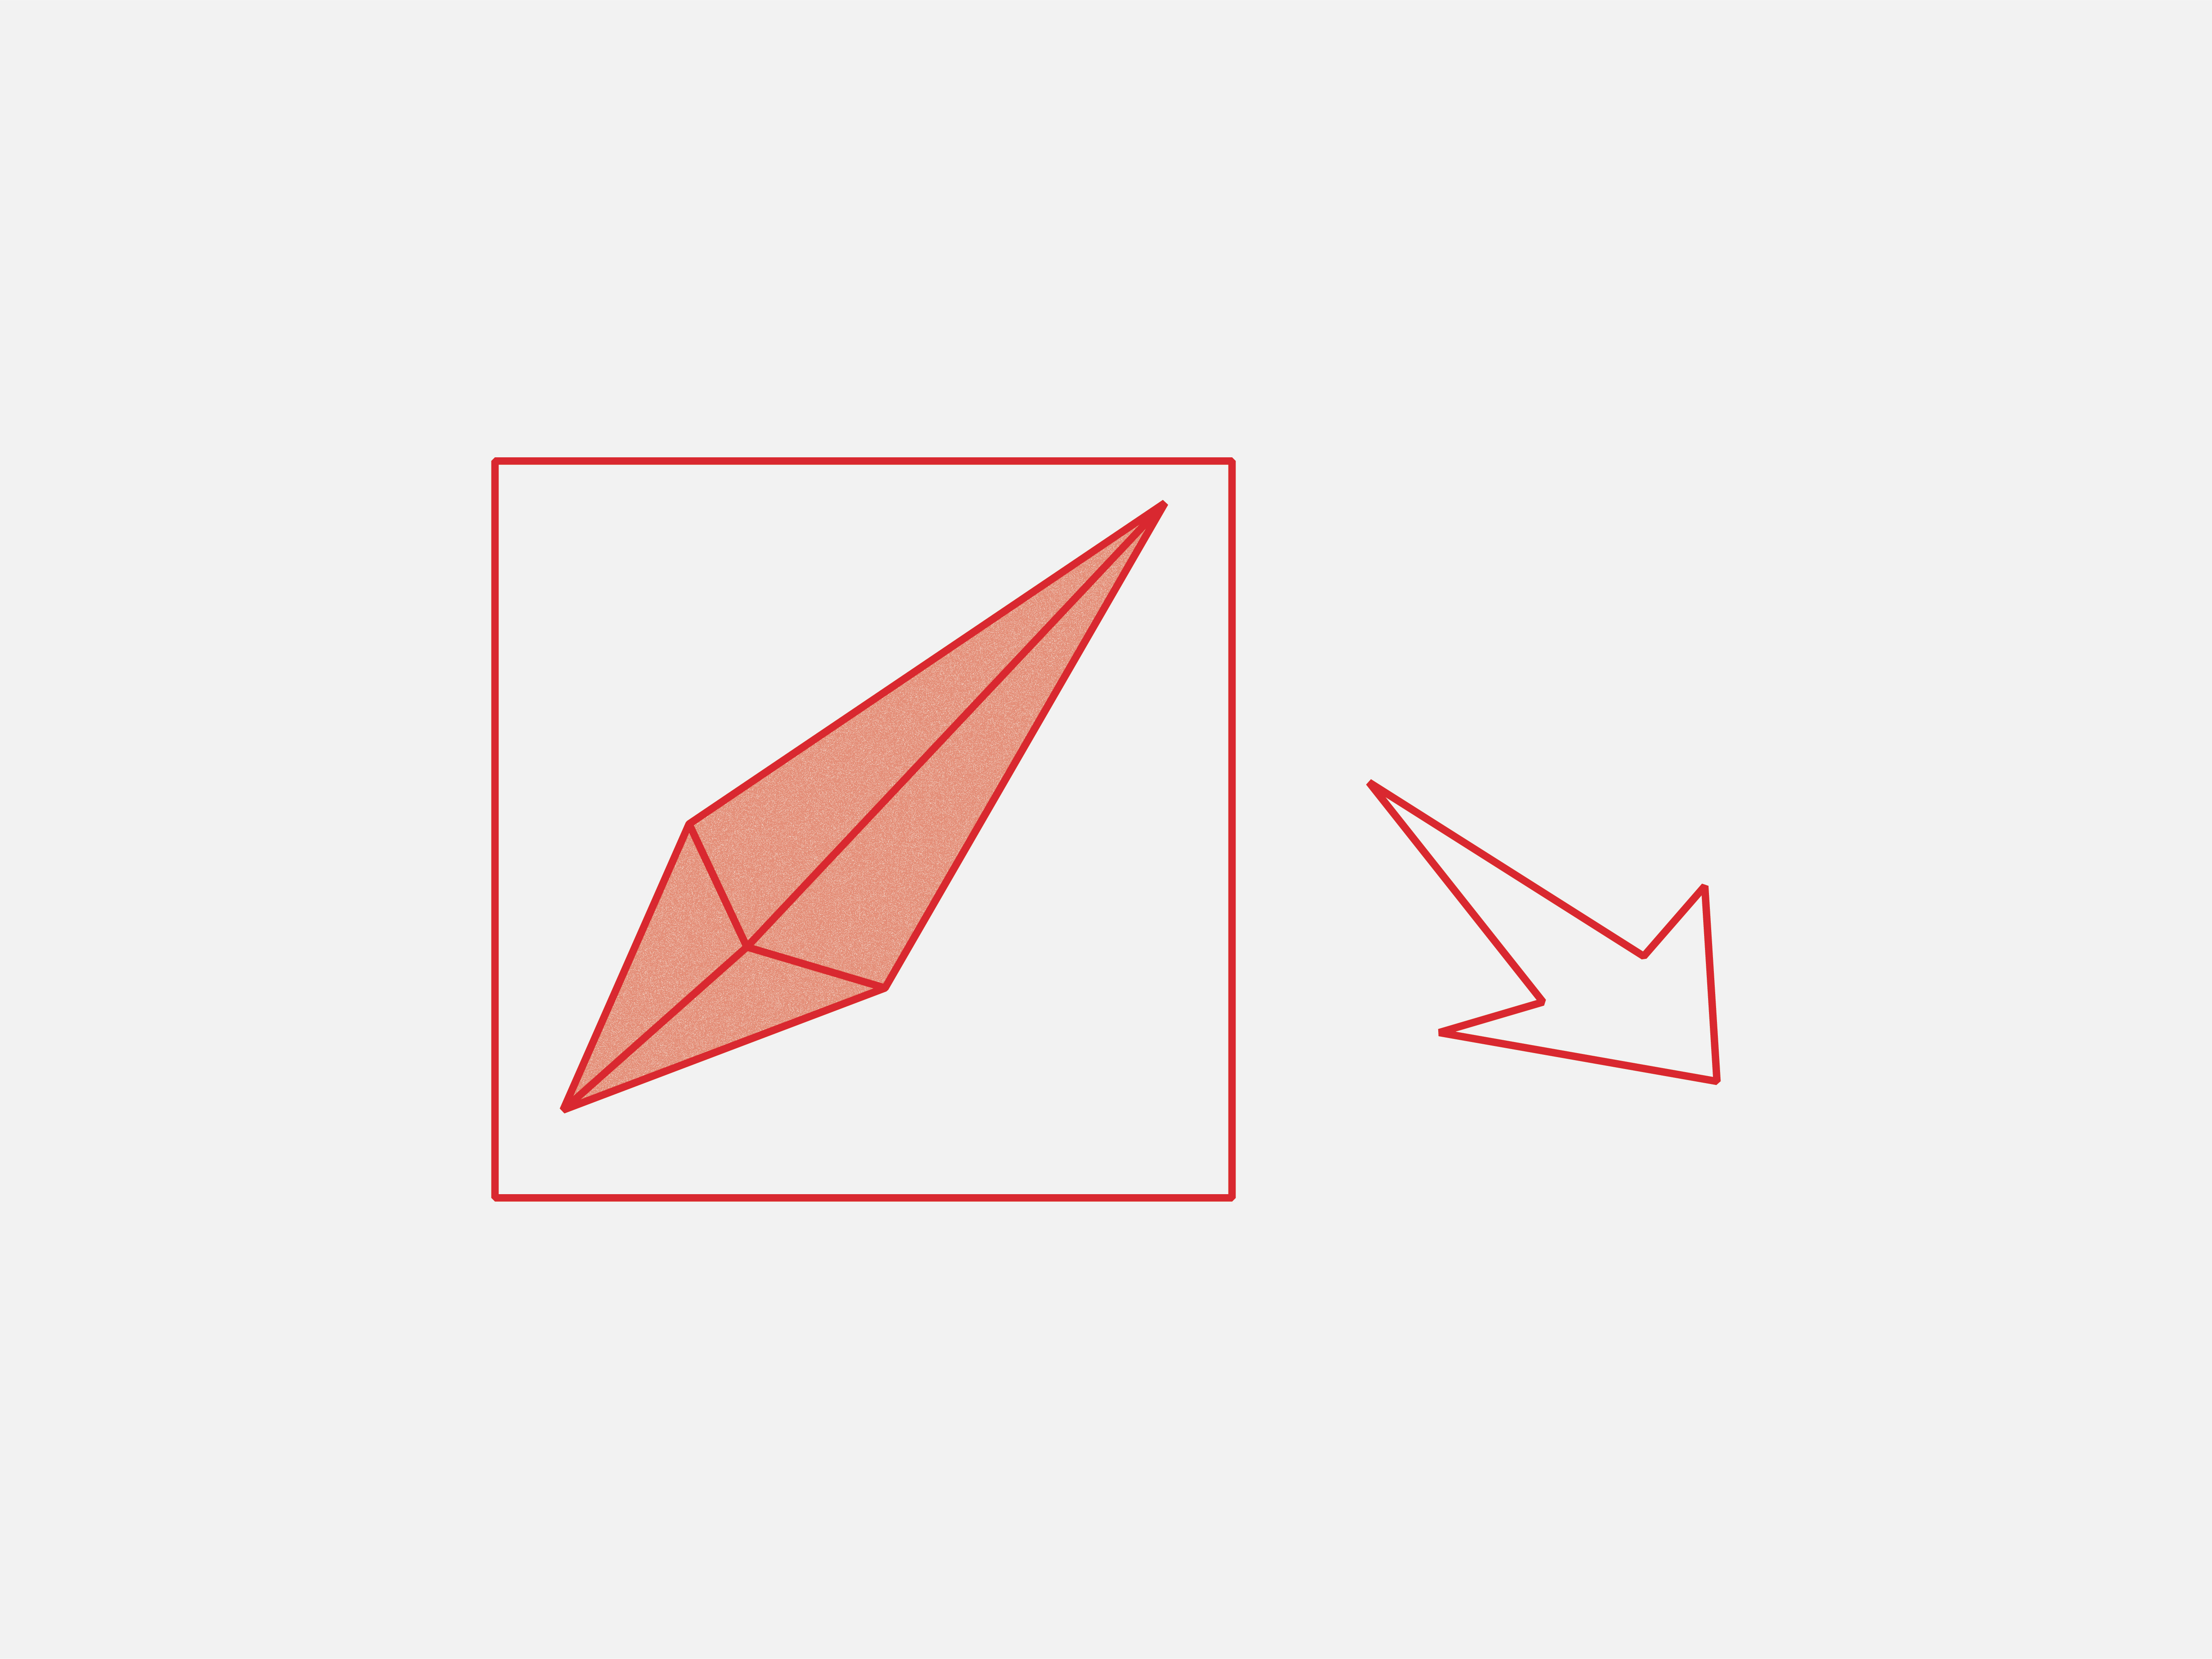 Your origami should now look like the shape shown. Proceed to step five.